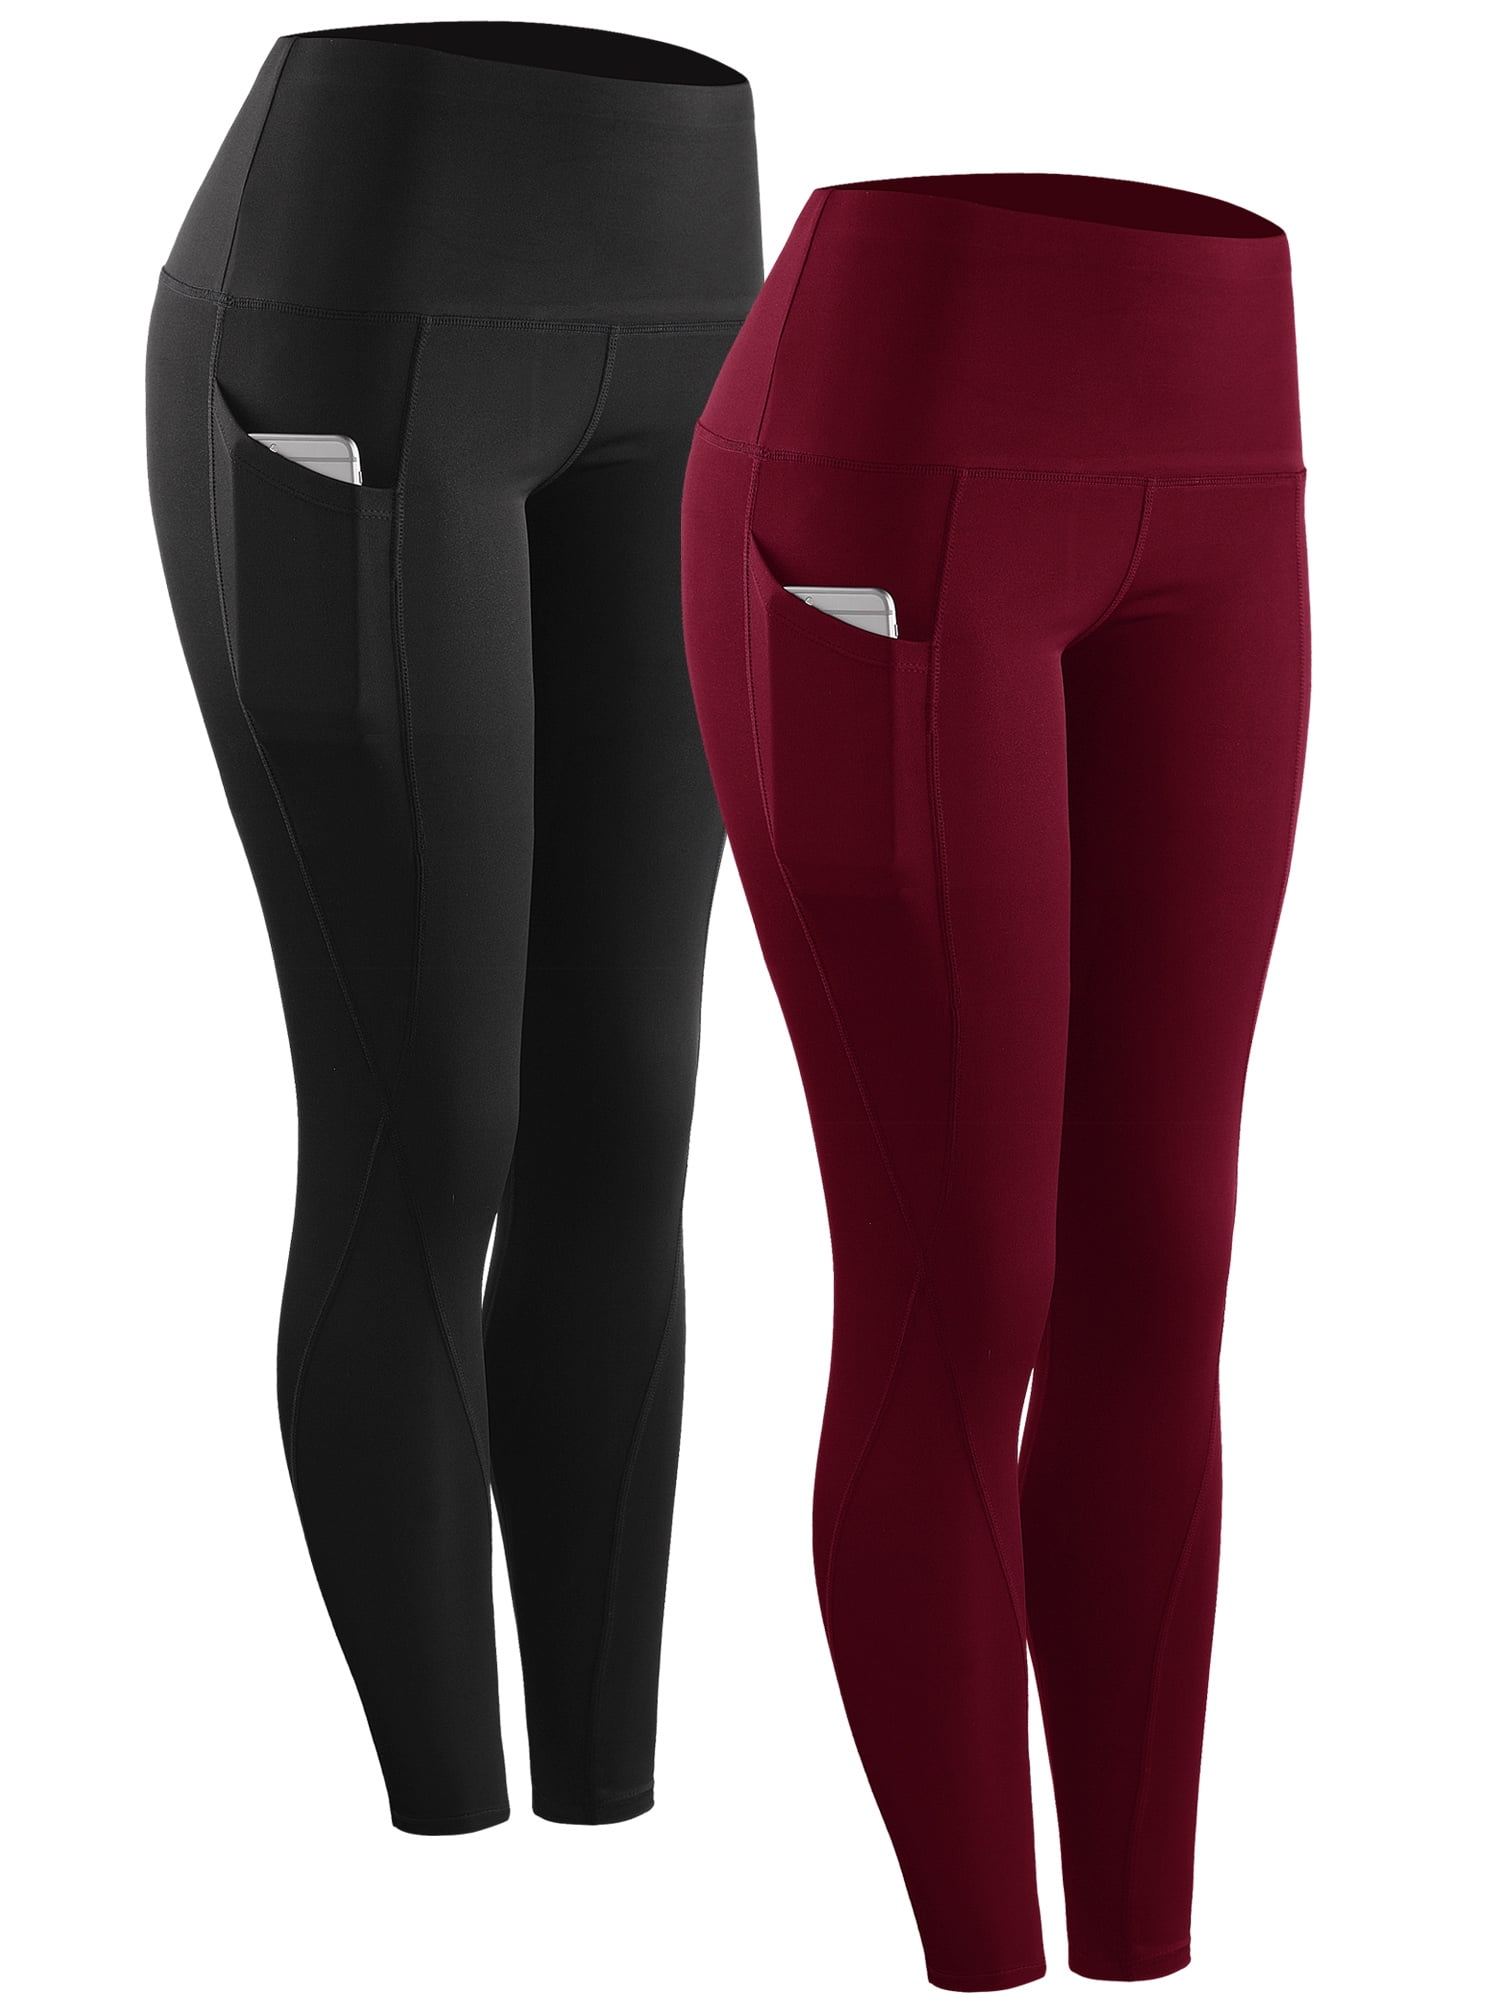 NELEUS Womens High Waist Running Workout Yoga Leggings with Pockets,Black+Red,US  Size 2XL 